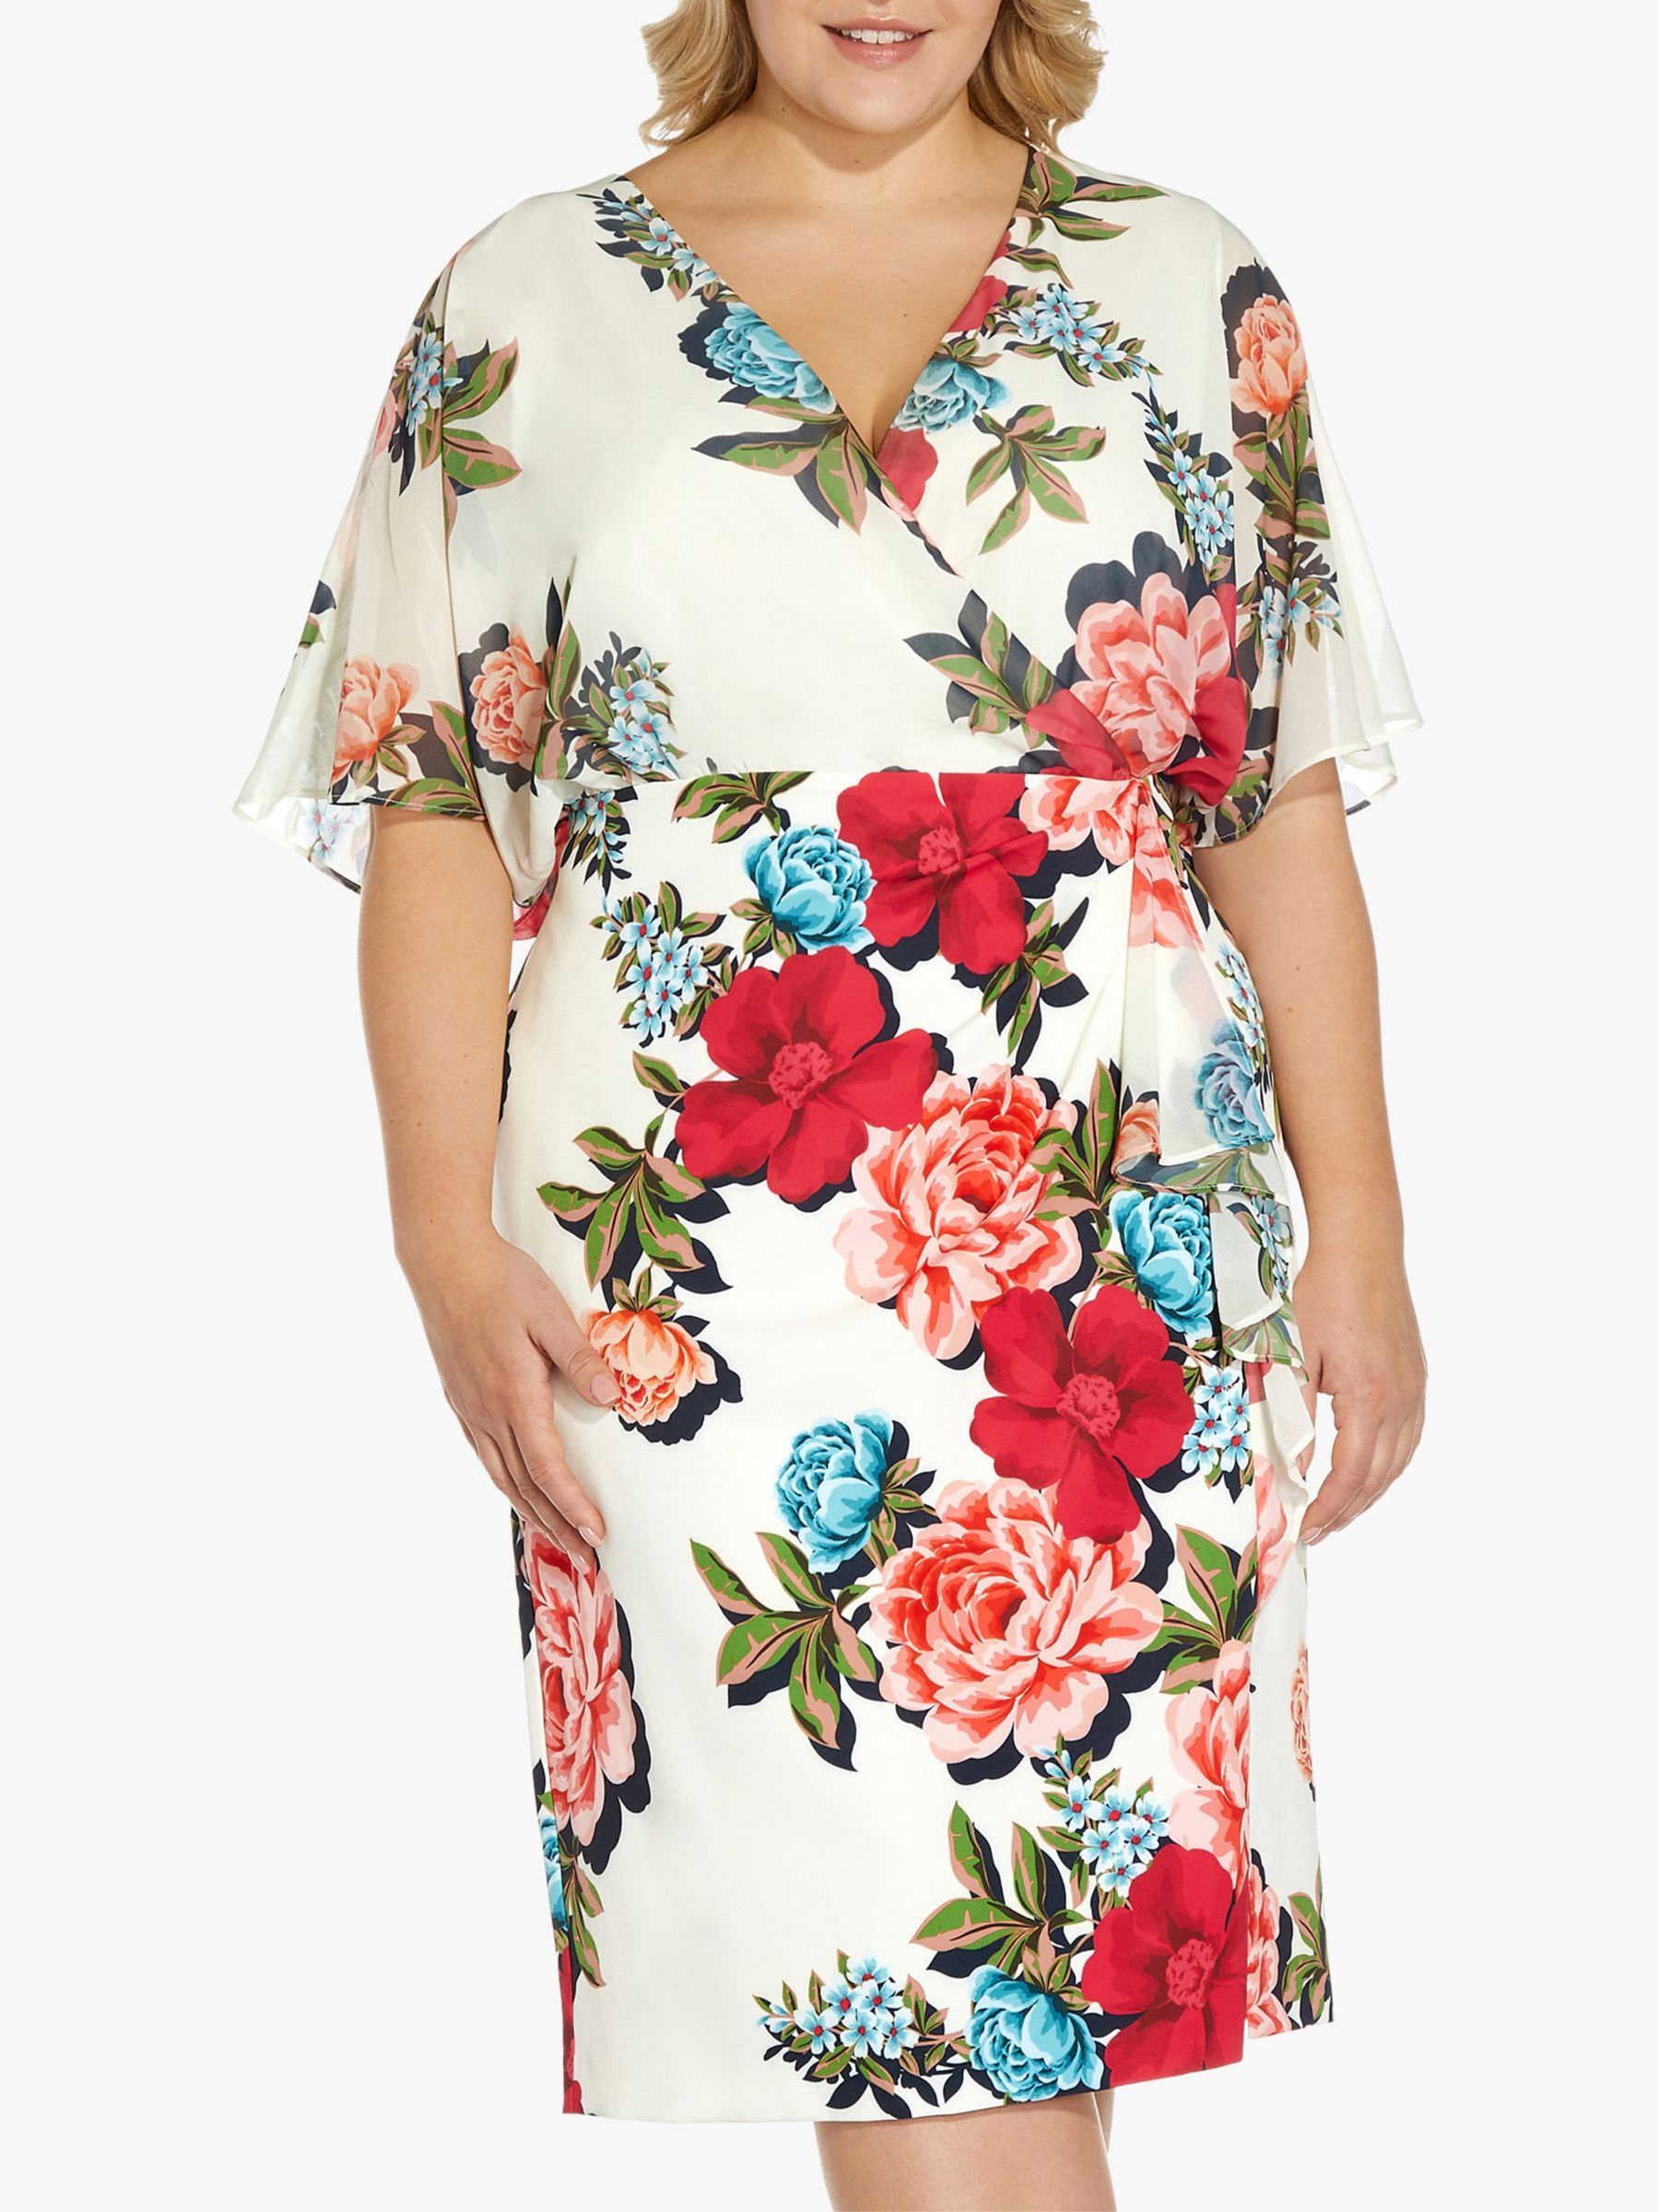 Bygger bord afkom Adrianna Papell Plus Size Floral Dress, Ivory/Multi at John Lewis & Partners